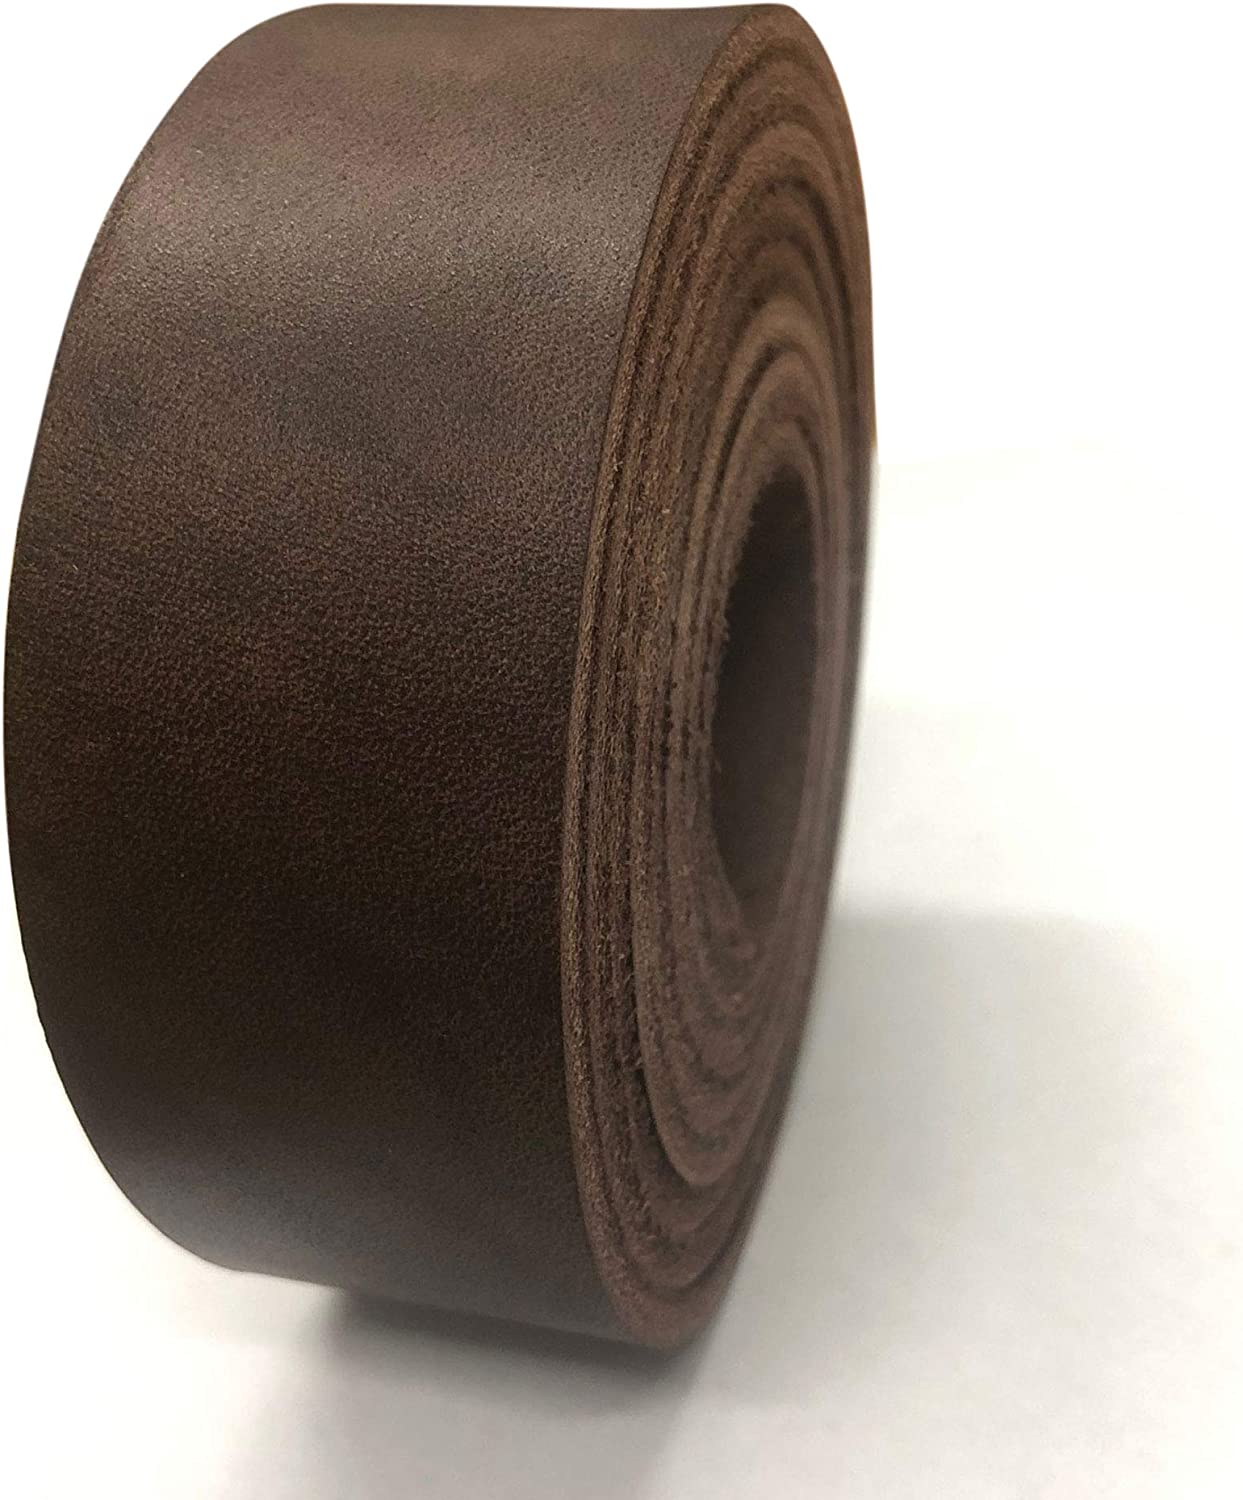 Leather Strap 1/2" Inch to 4" Wide, 60-70 Inches Long - Brown